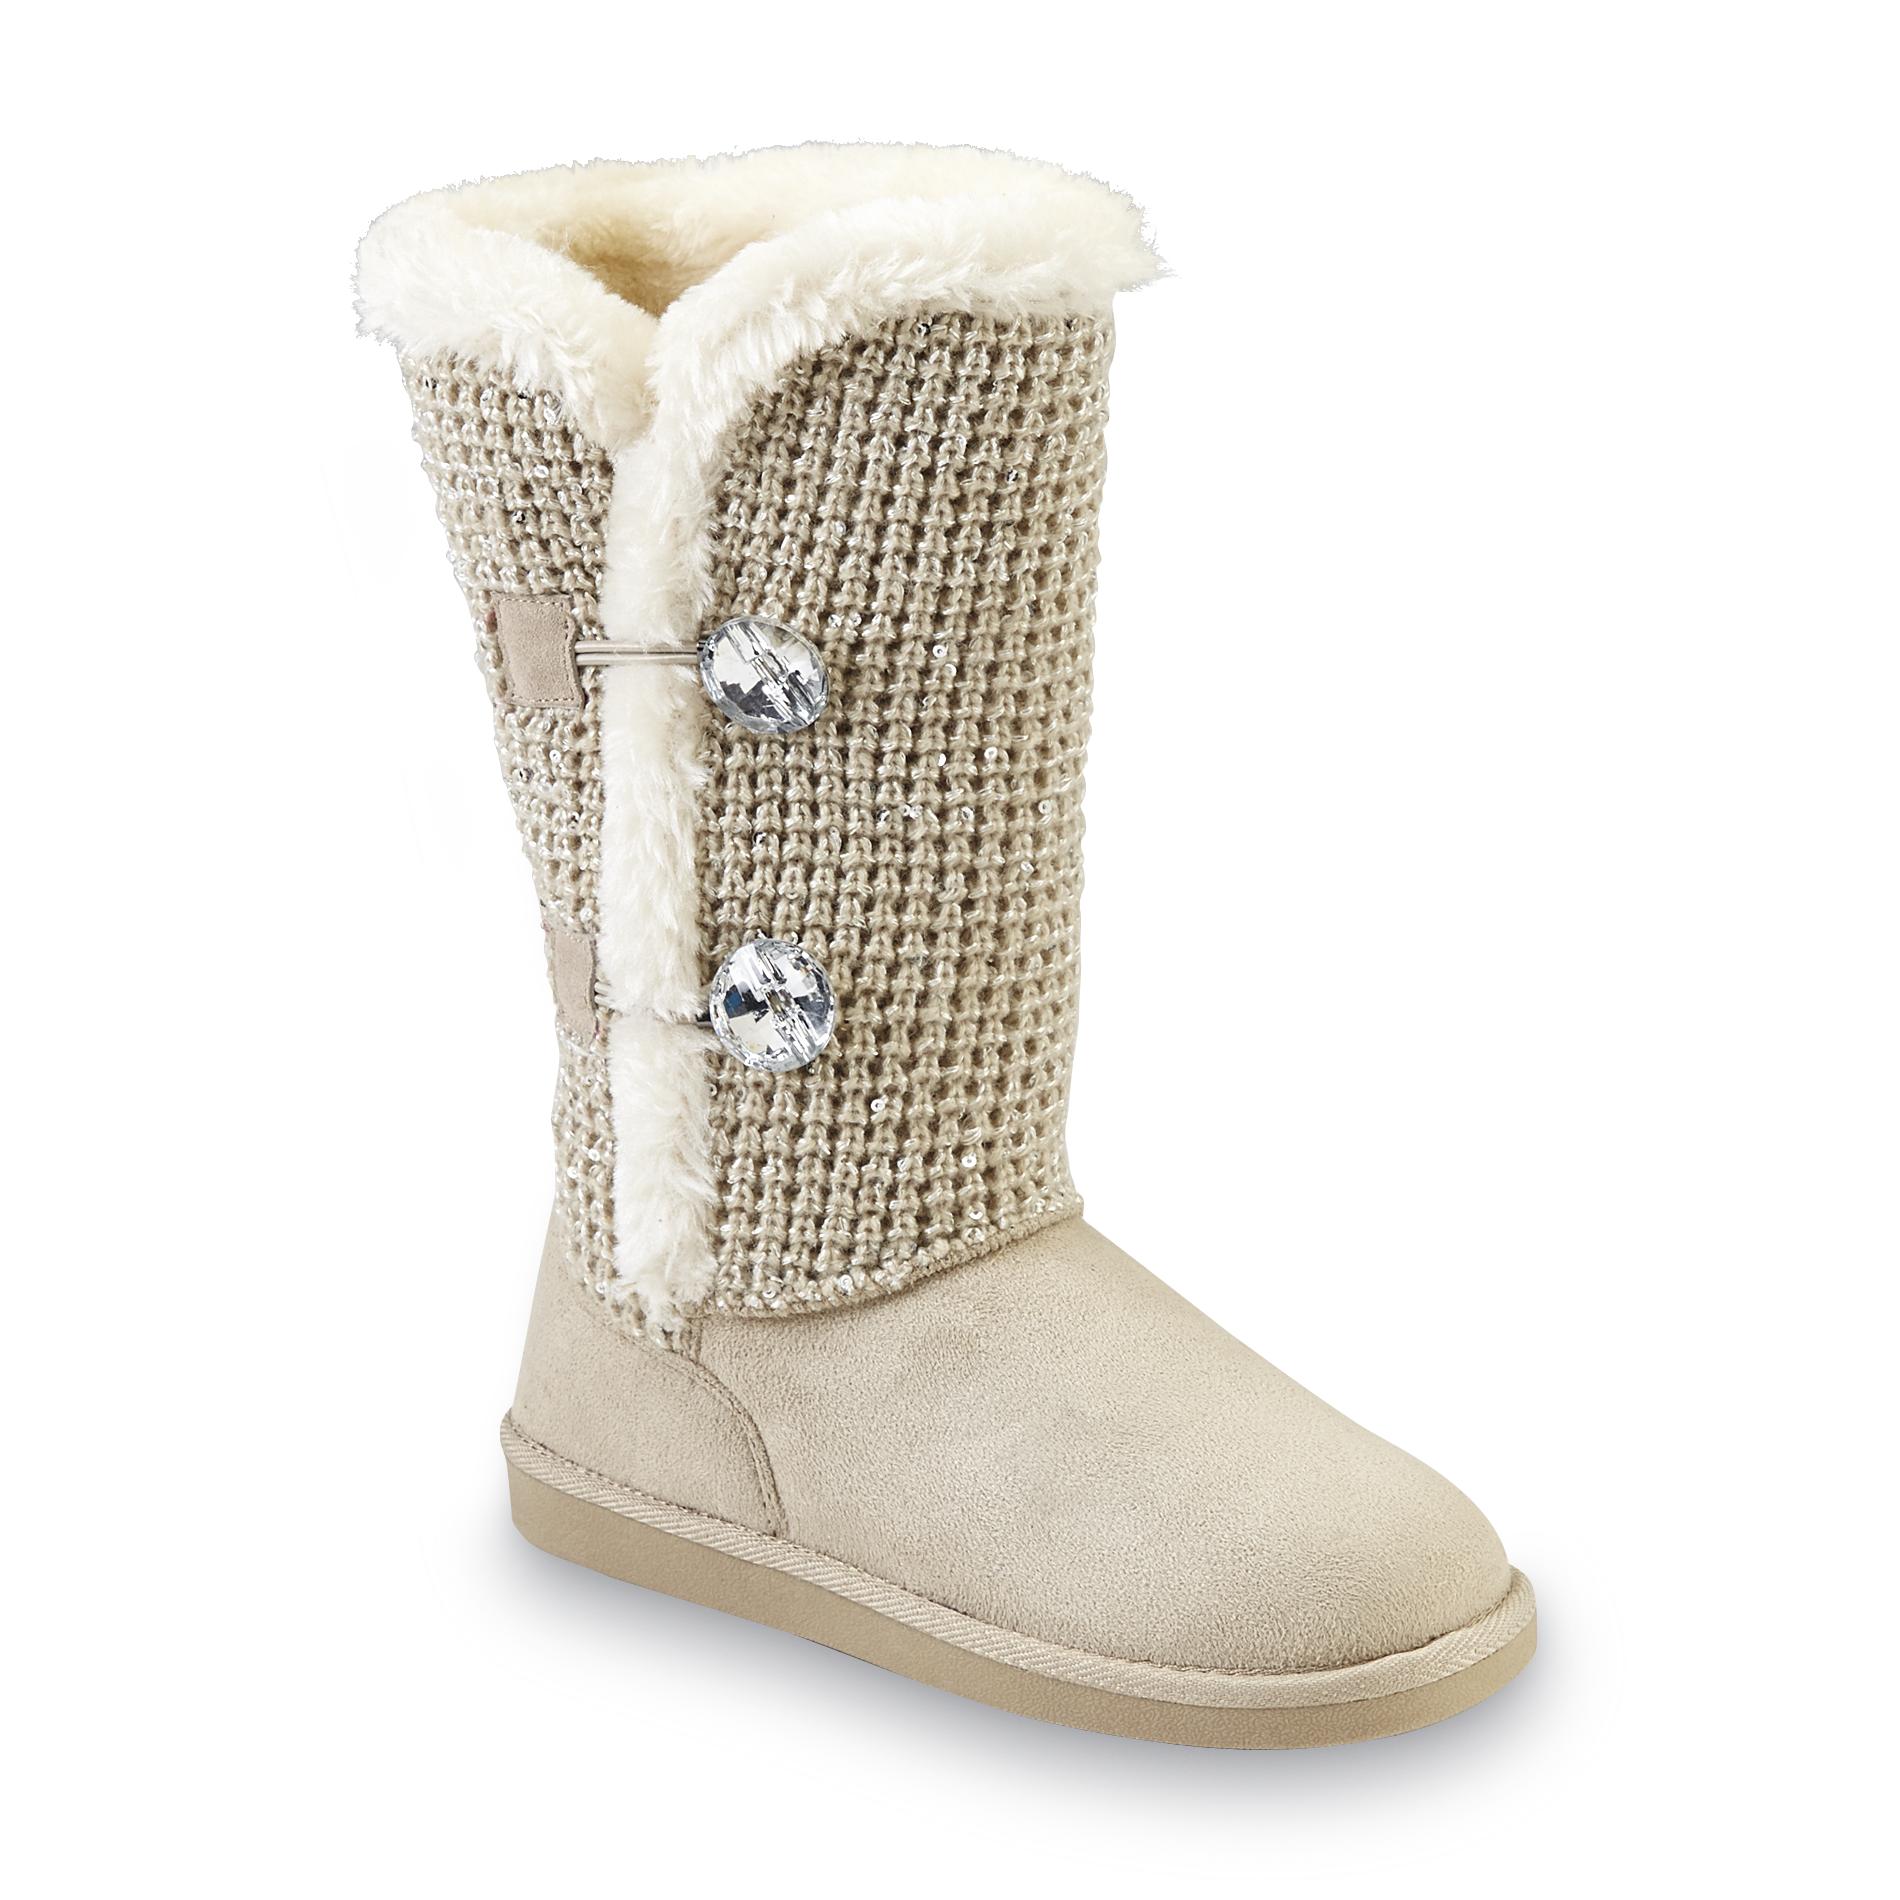 Canyon River Blues Shine Taupe Cozy Boot—Sears